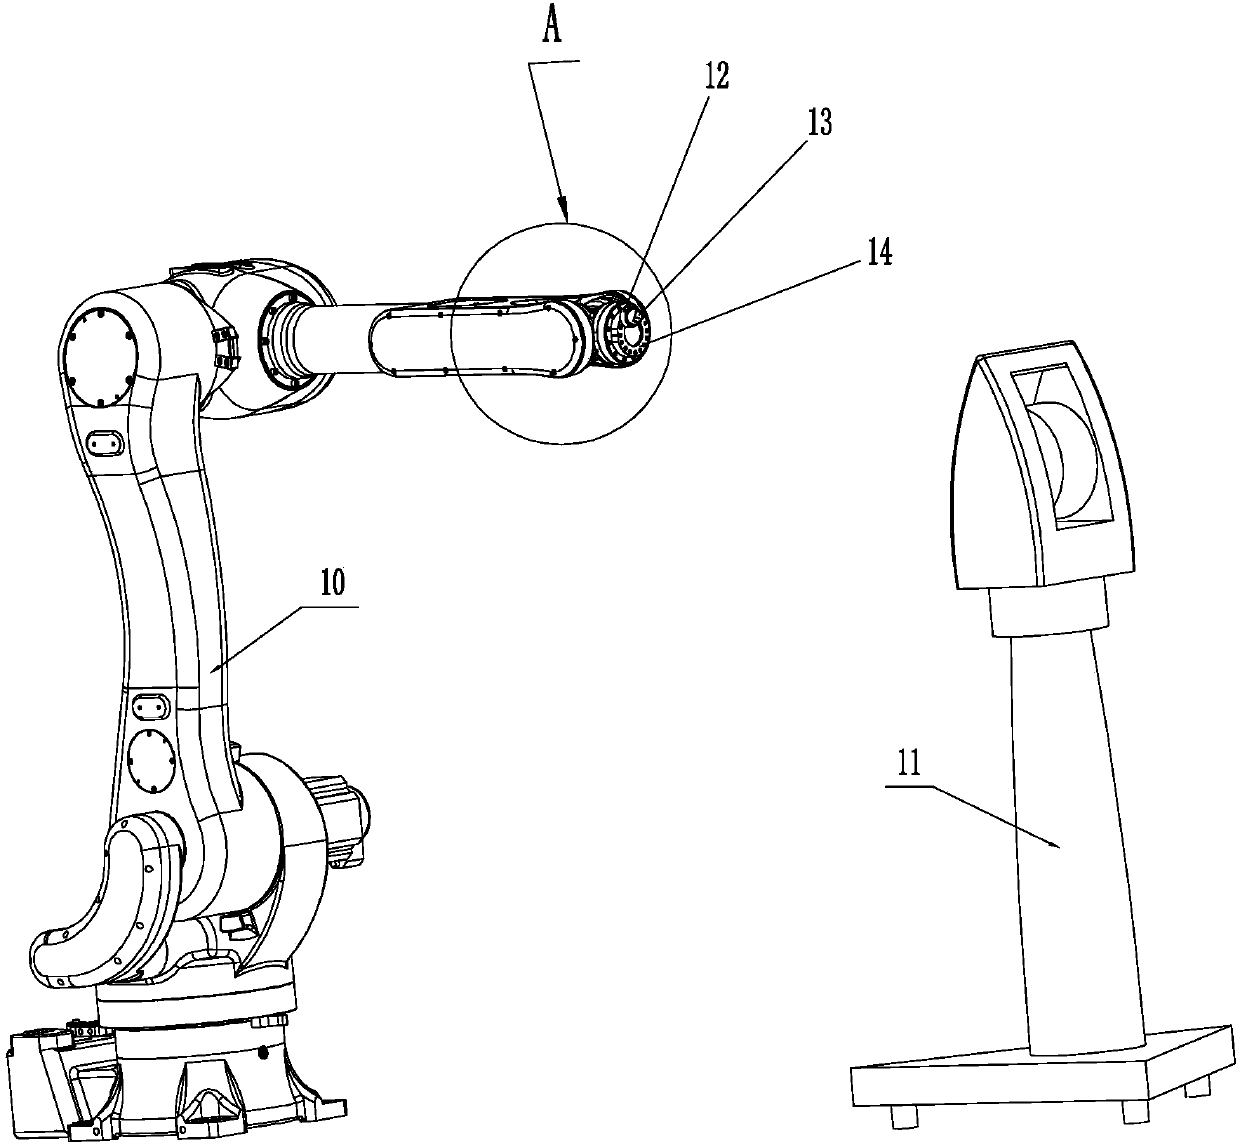 Laser-tracker-based calibration method for six-degree-of-freedom robot tool coordinate system